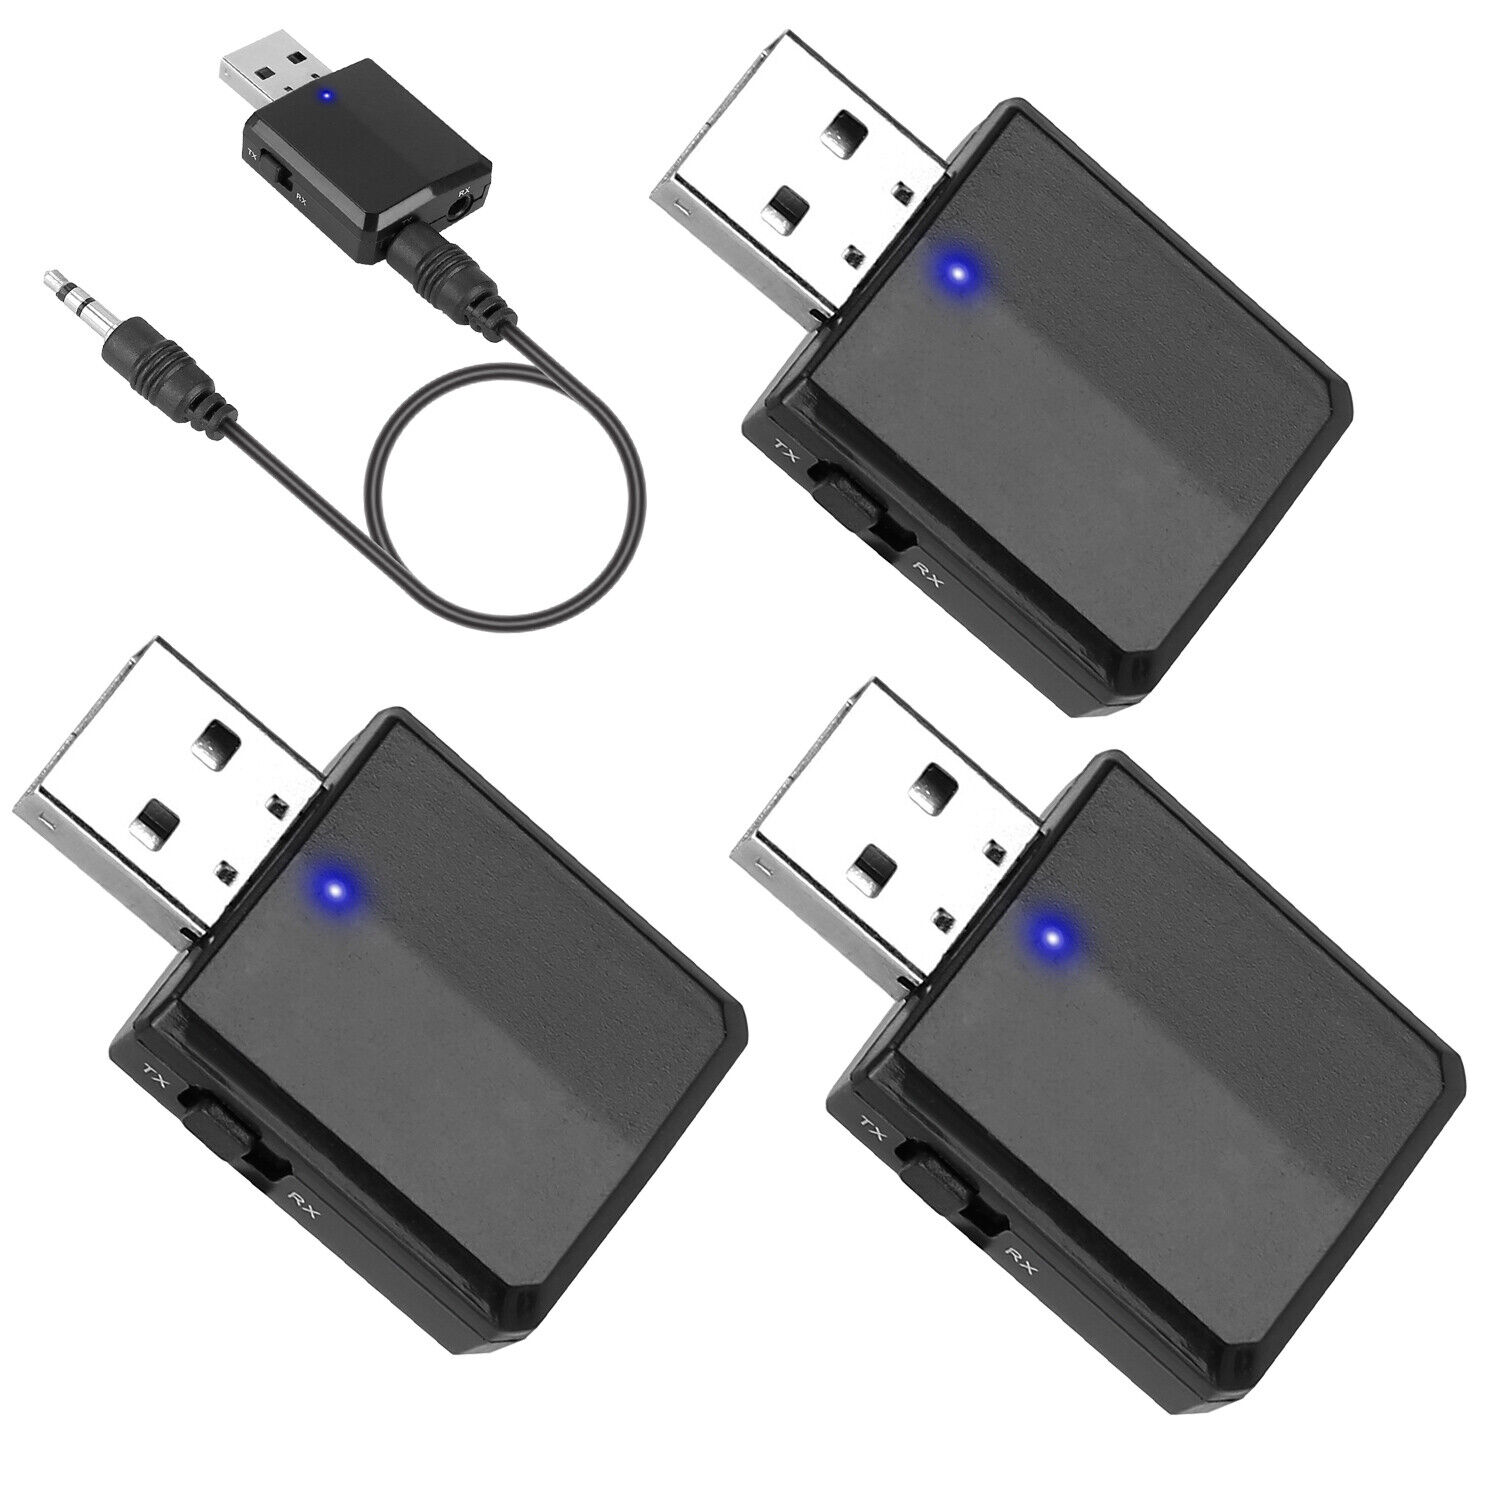 3PCS USB Wireless 5.0 Audio Transmitter & Receiver Adapter 3.5mm for TV PC Car